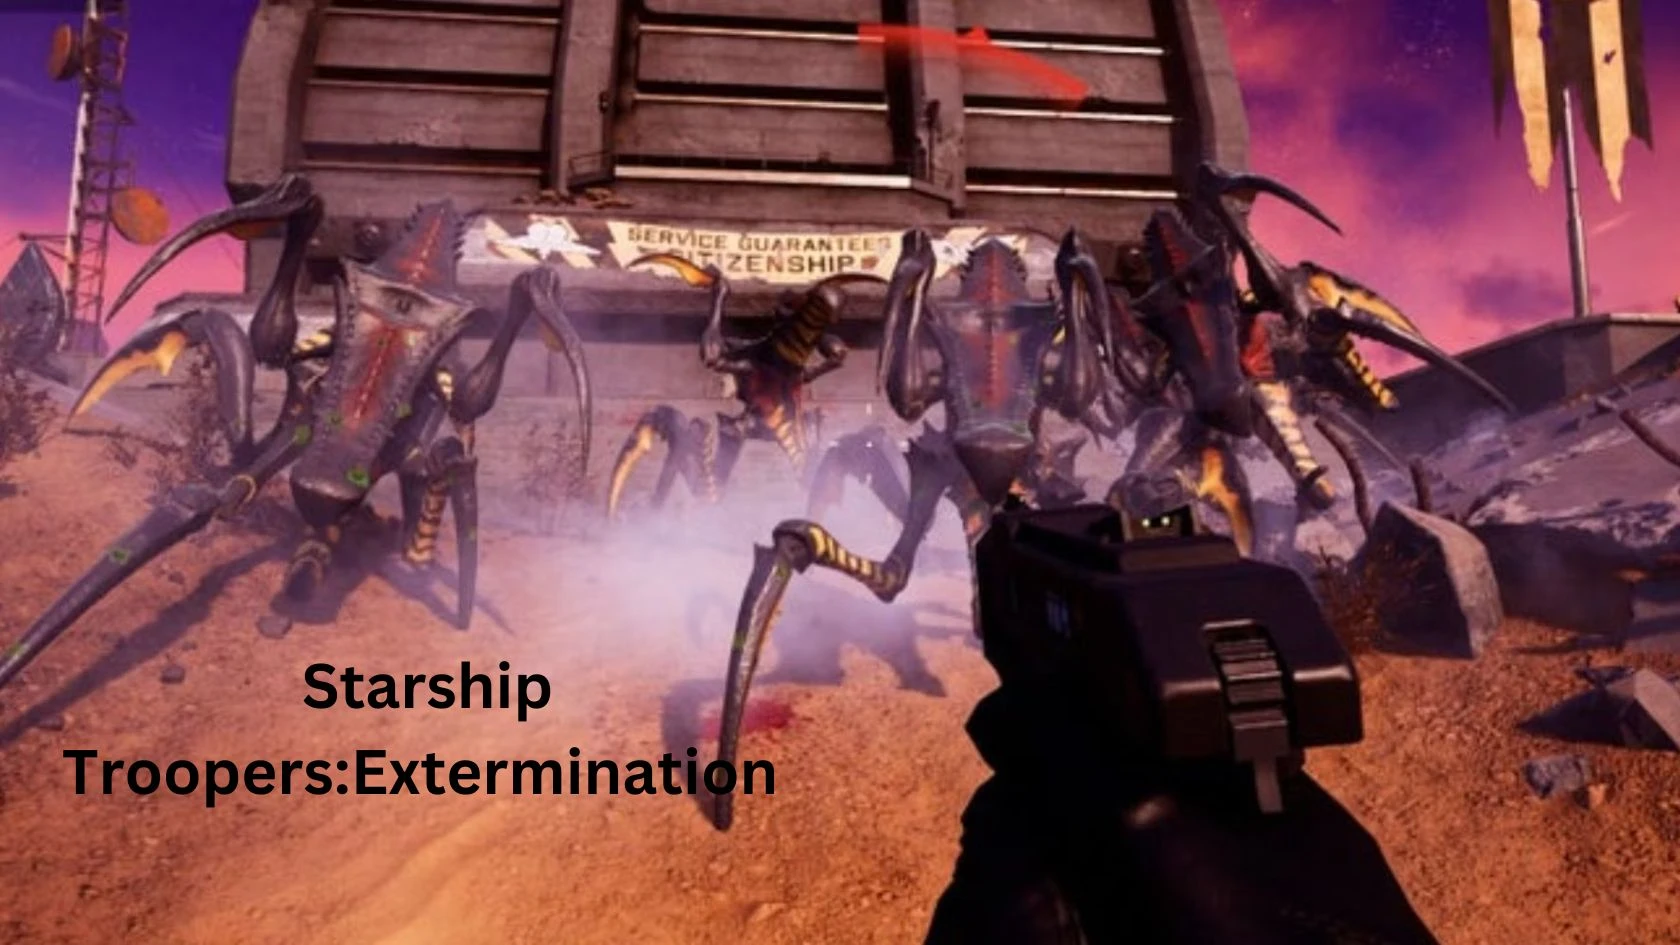 Starship Troopers: Extermination Parents Guide